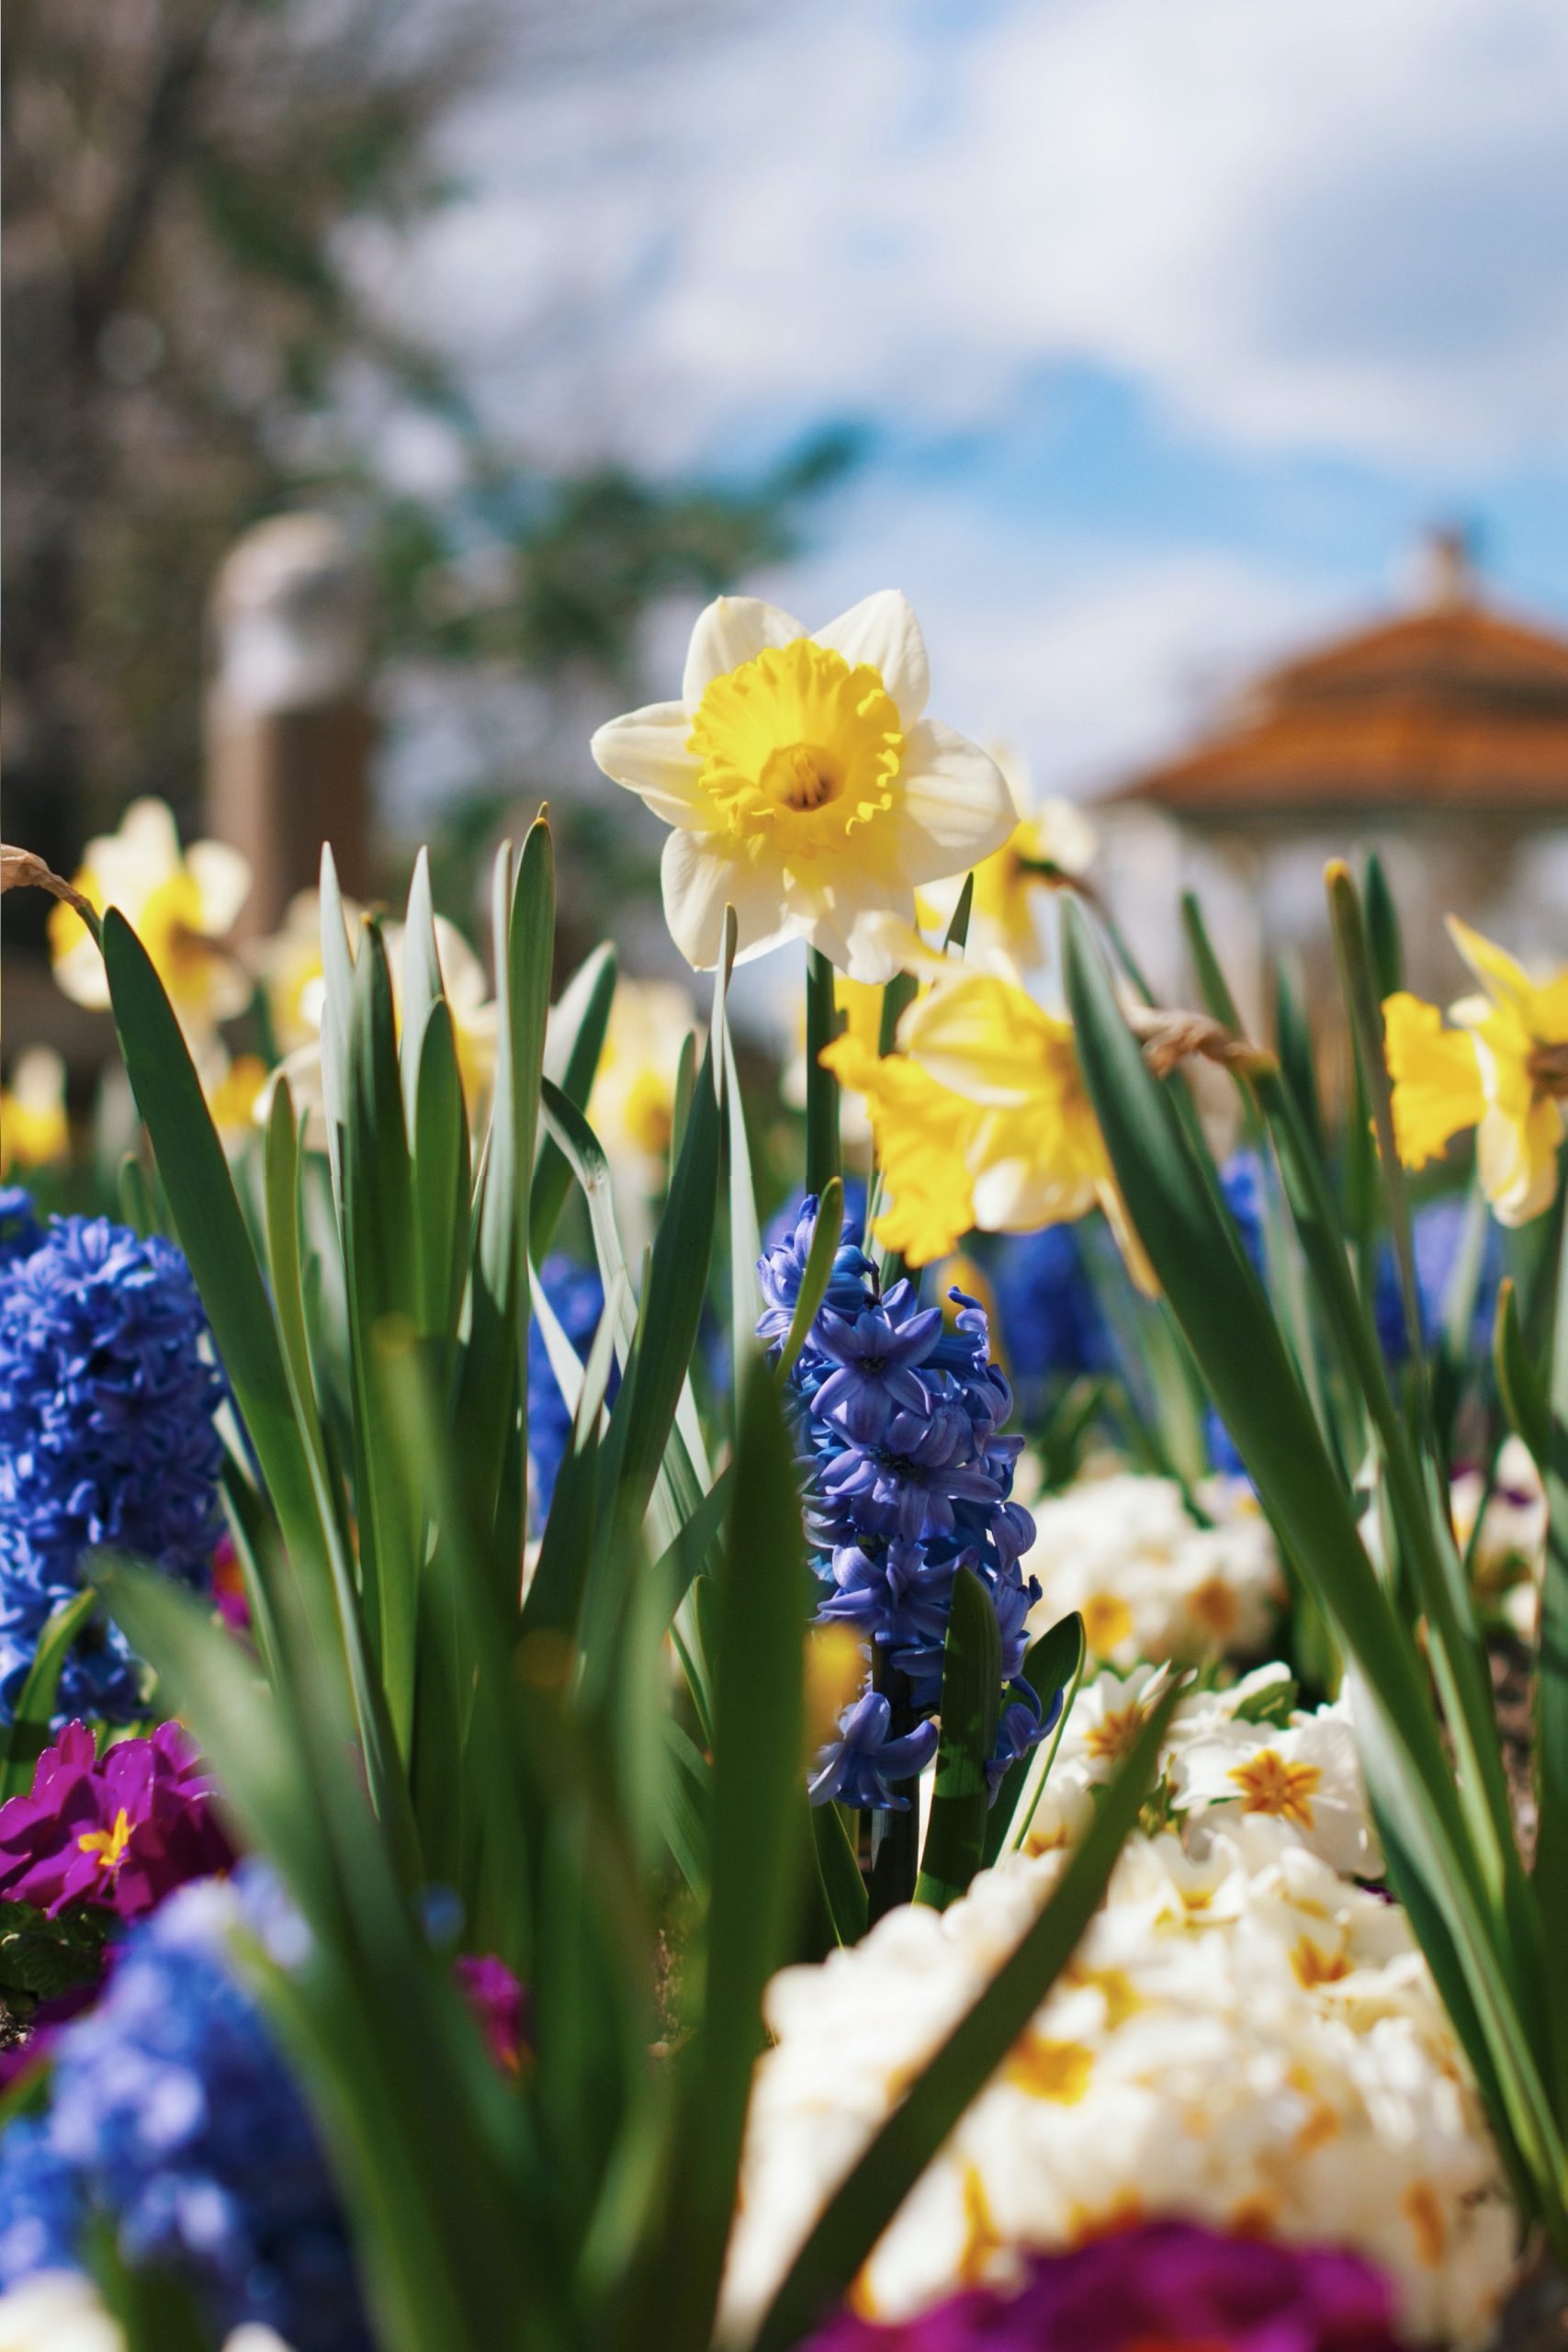 Can You Plant Bulbs In Spring?